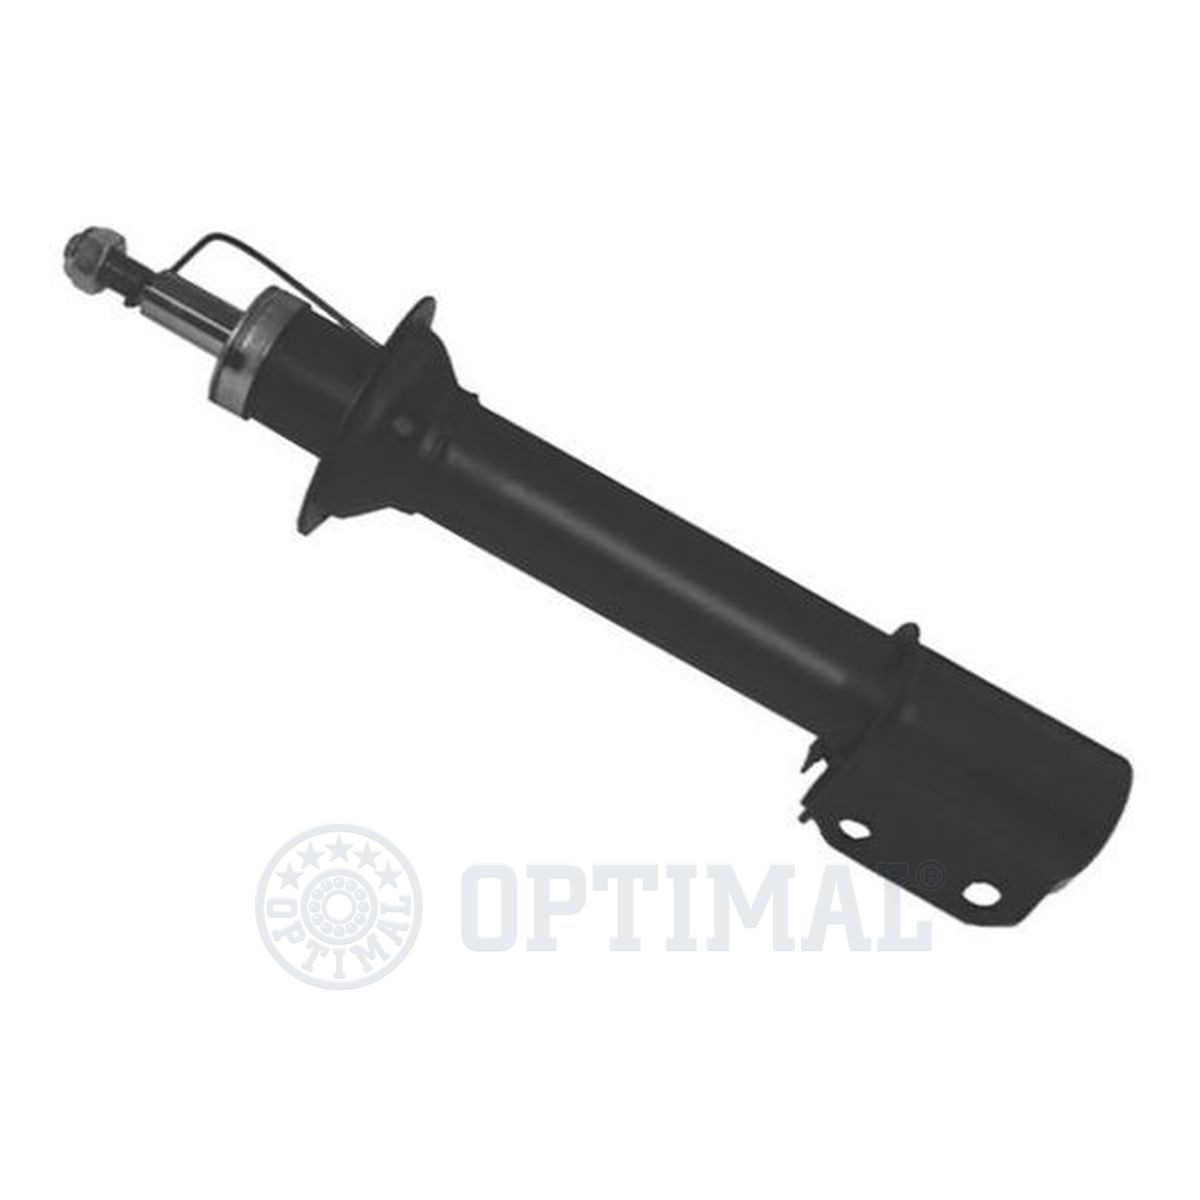 OPTIMAL A-3050G Shock absorber Front Axle, Gas Pressure, Twin-Tube, Suspension Strut, Spring-bearing Damper, Top pin, Bottom Clamp, M14x1,5